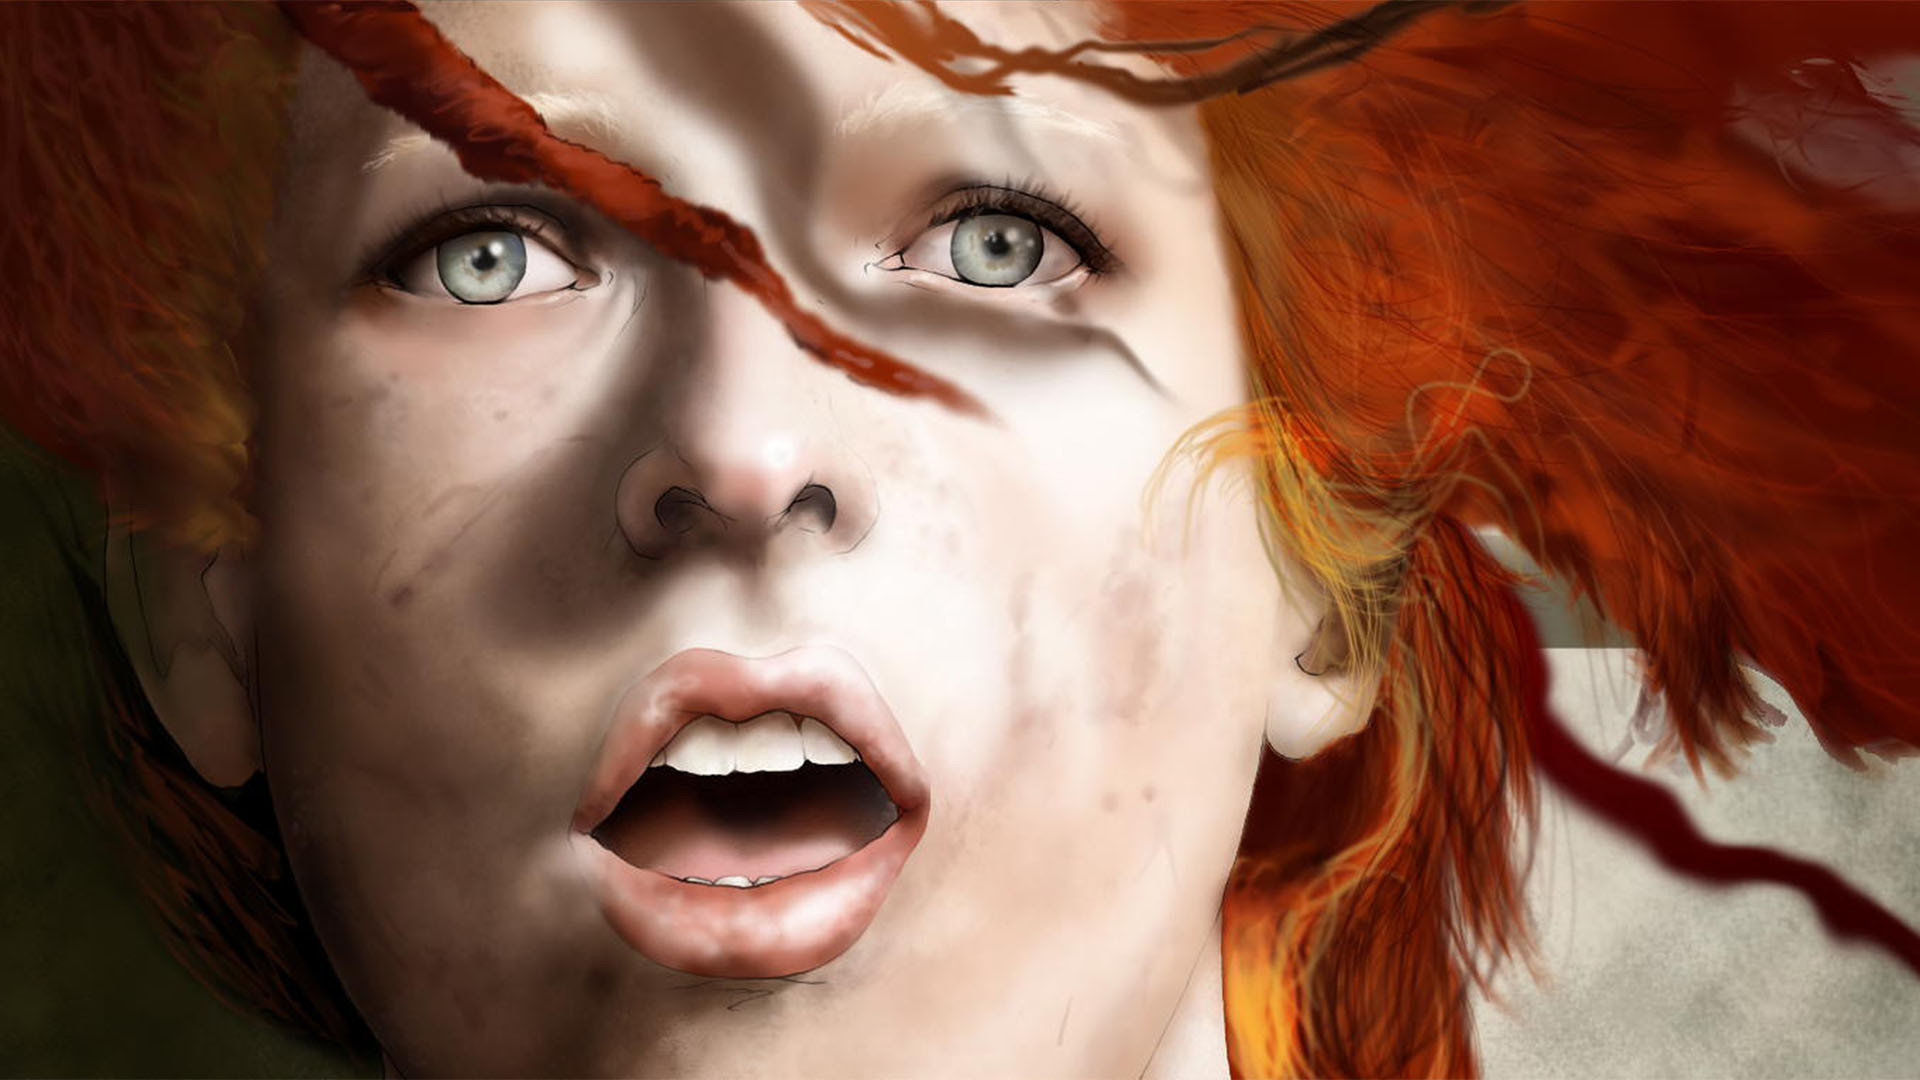 Leeloo The Fifth Element Milla Jovovich The Fifth Element 1920x1080